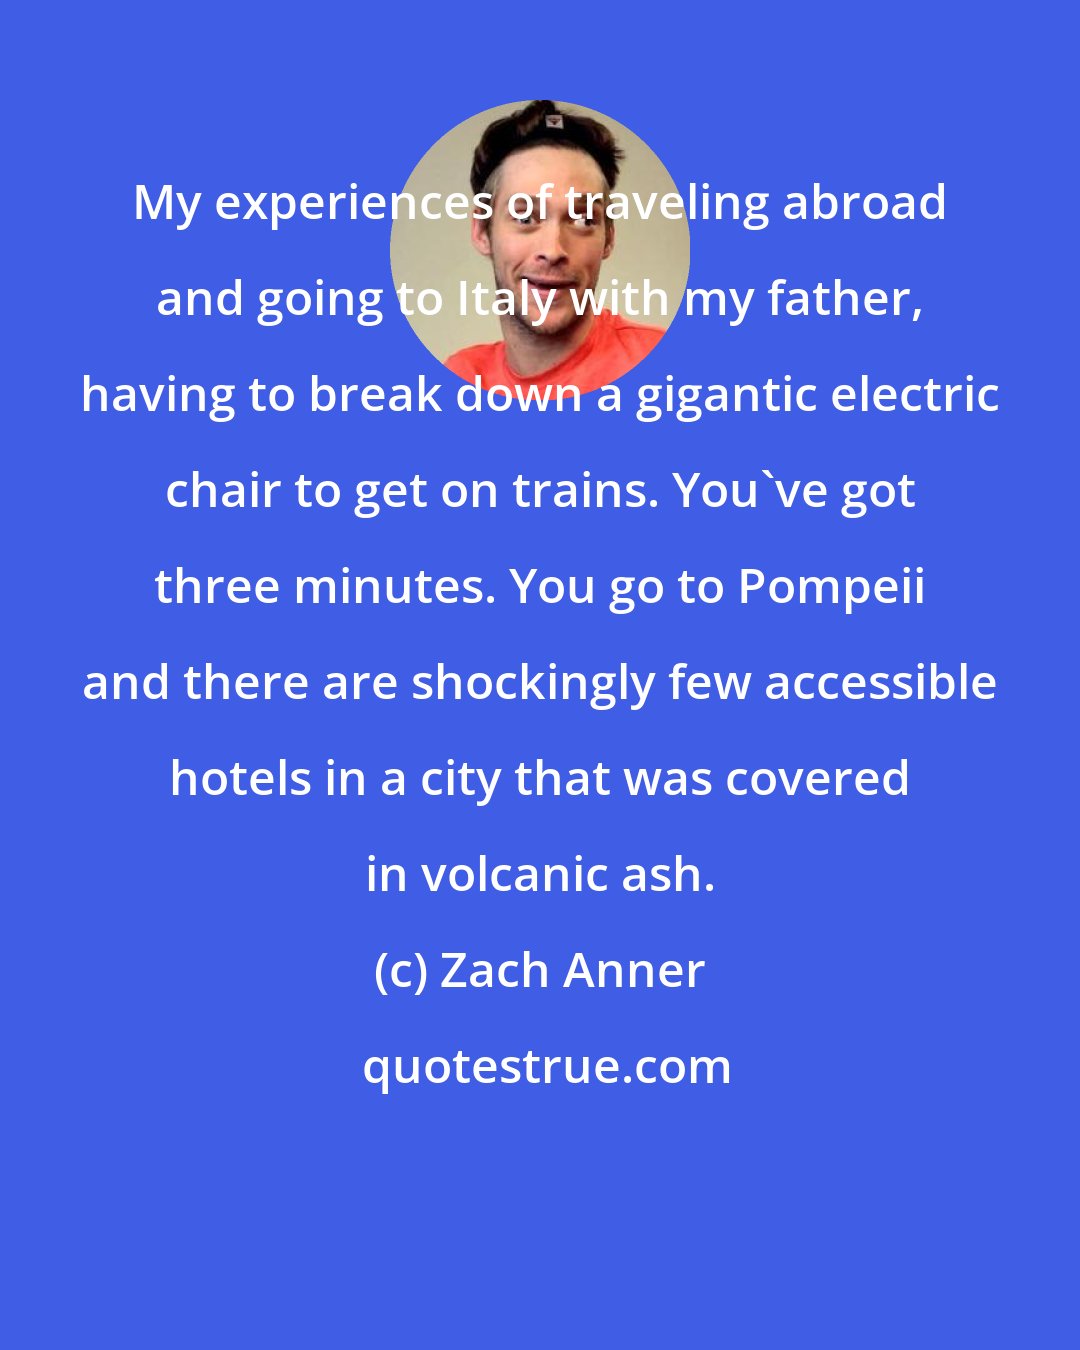 Zach Anner: My experiences of traveling abroad and going to Italy with my father, having to break down a gigantic electric chair to get on trains. You've got three minutes. You go to Pompeii and there are shockingly few accessible hotels in a city that was covered in volcanic ash.